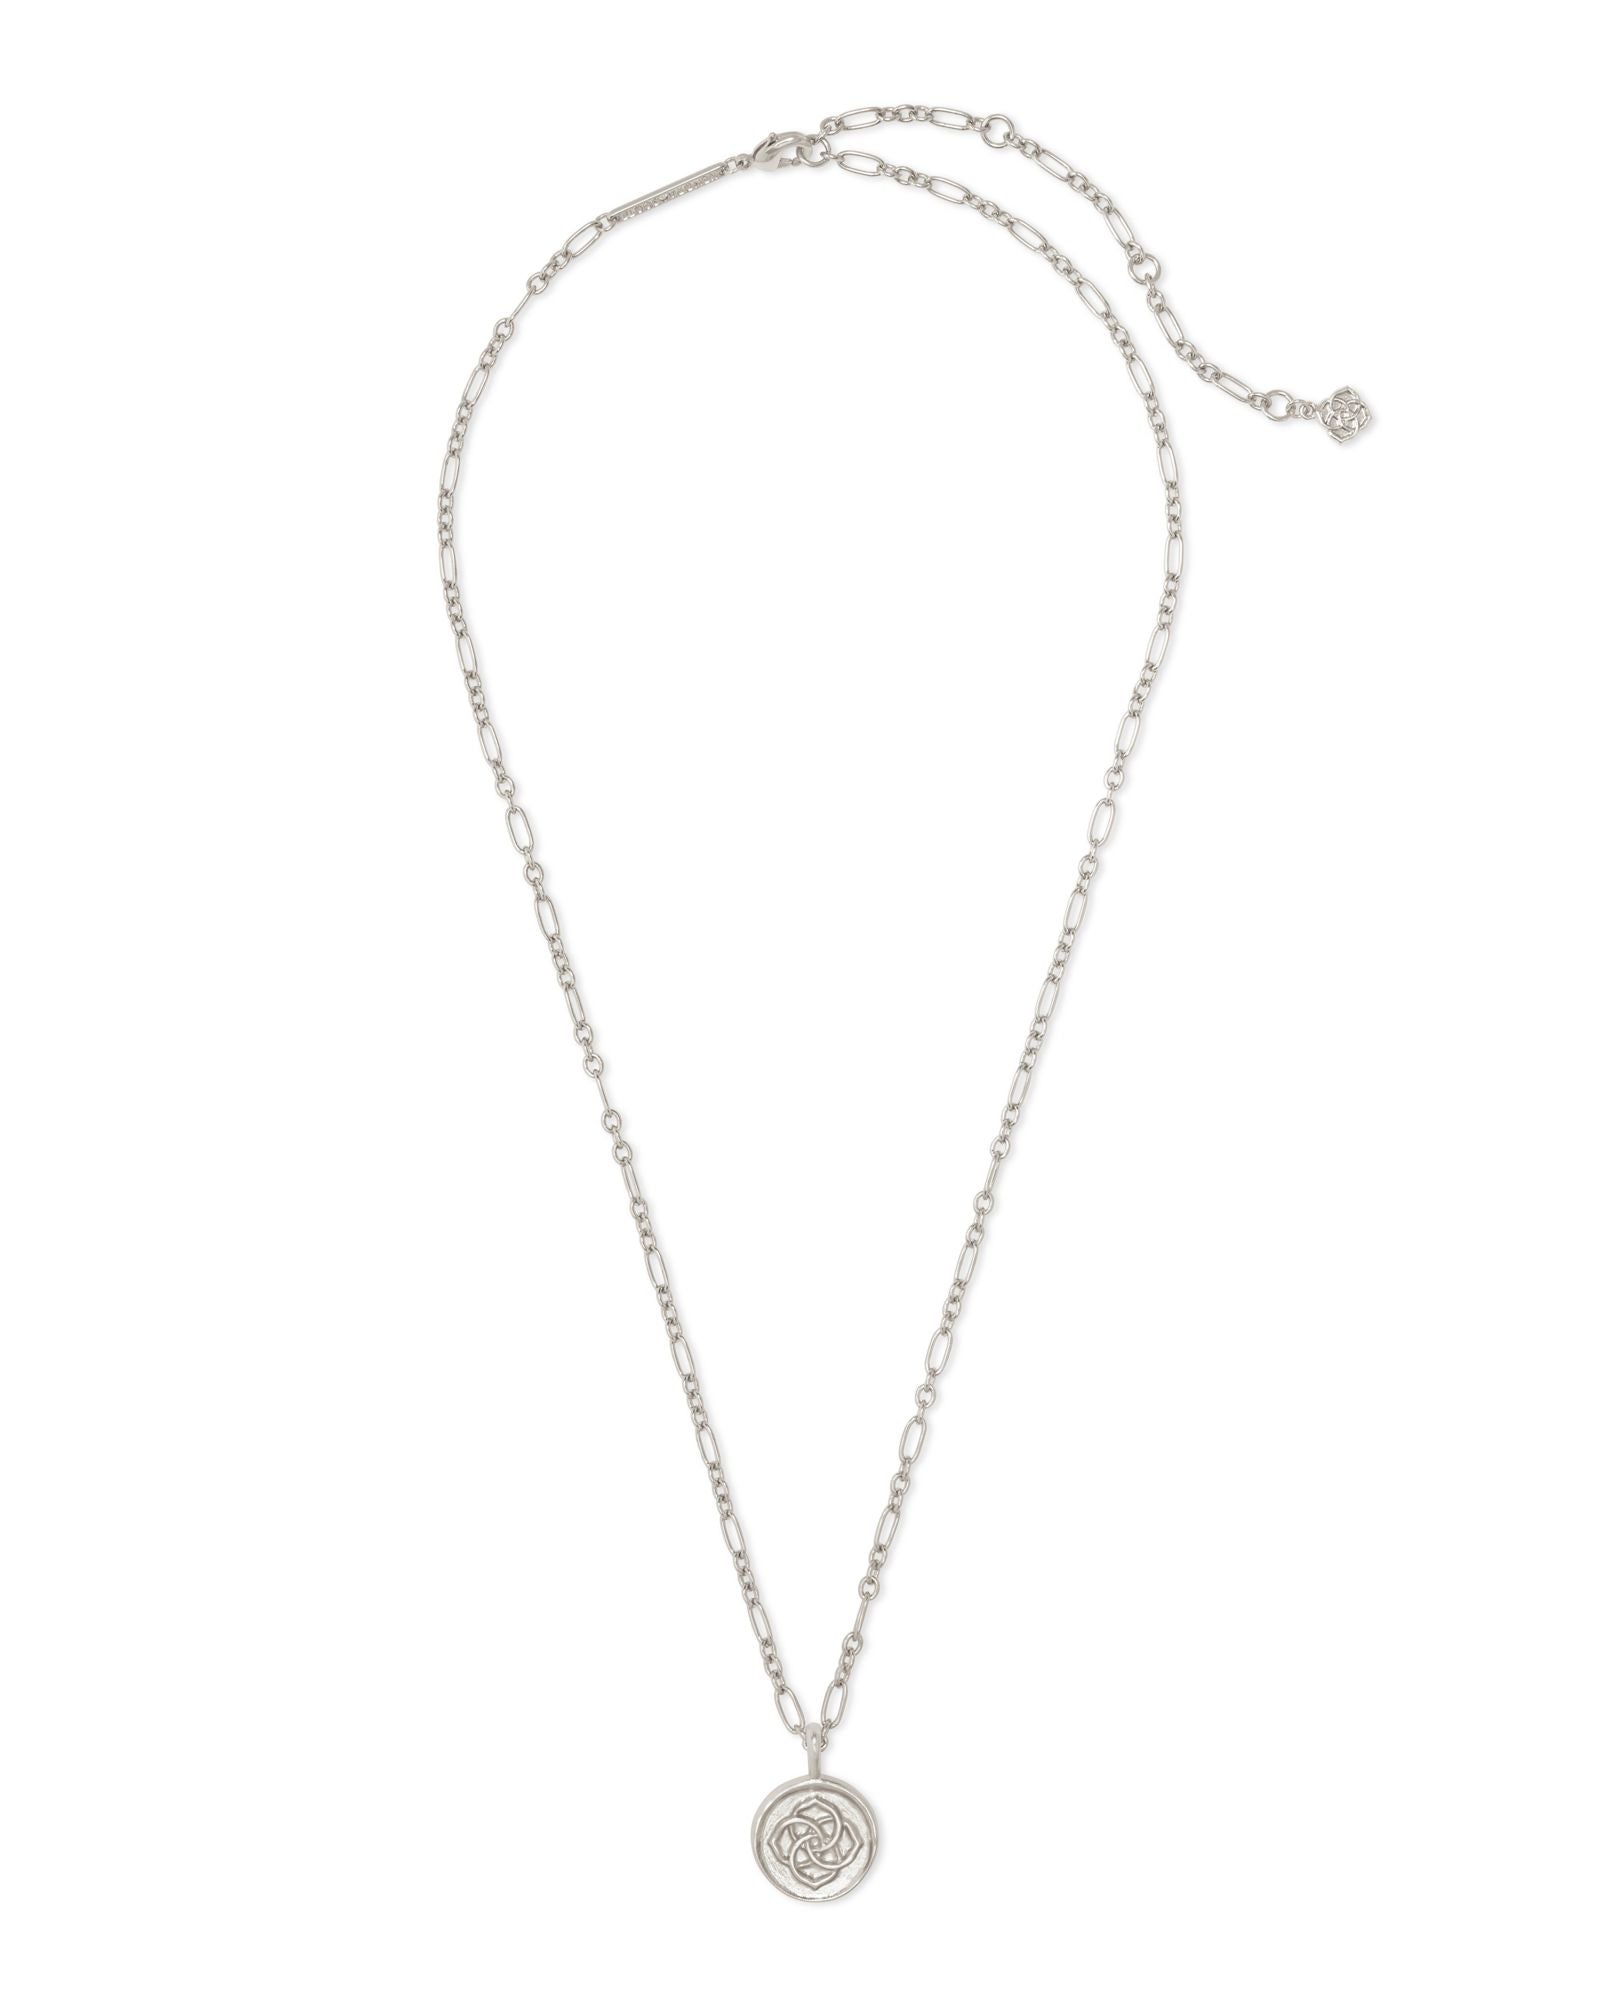 Dira Coin Pendant Necklace in Silver Metal